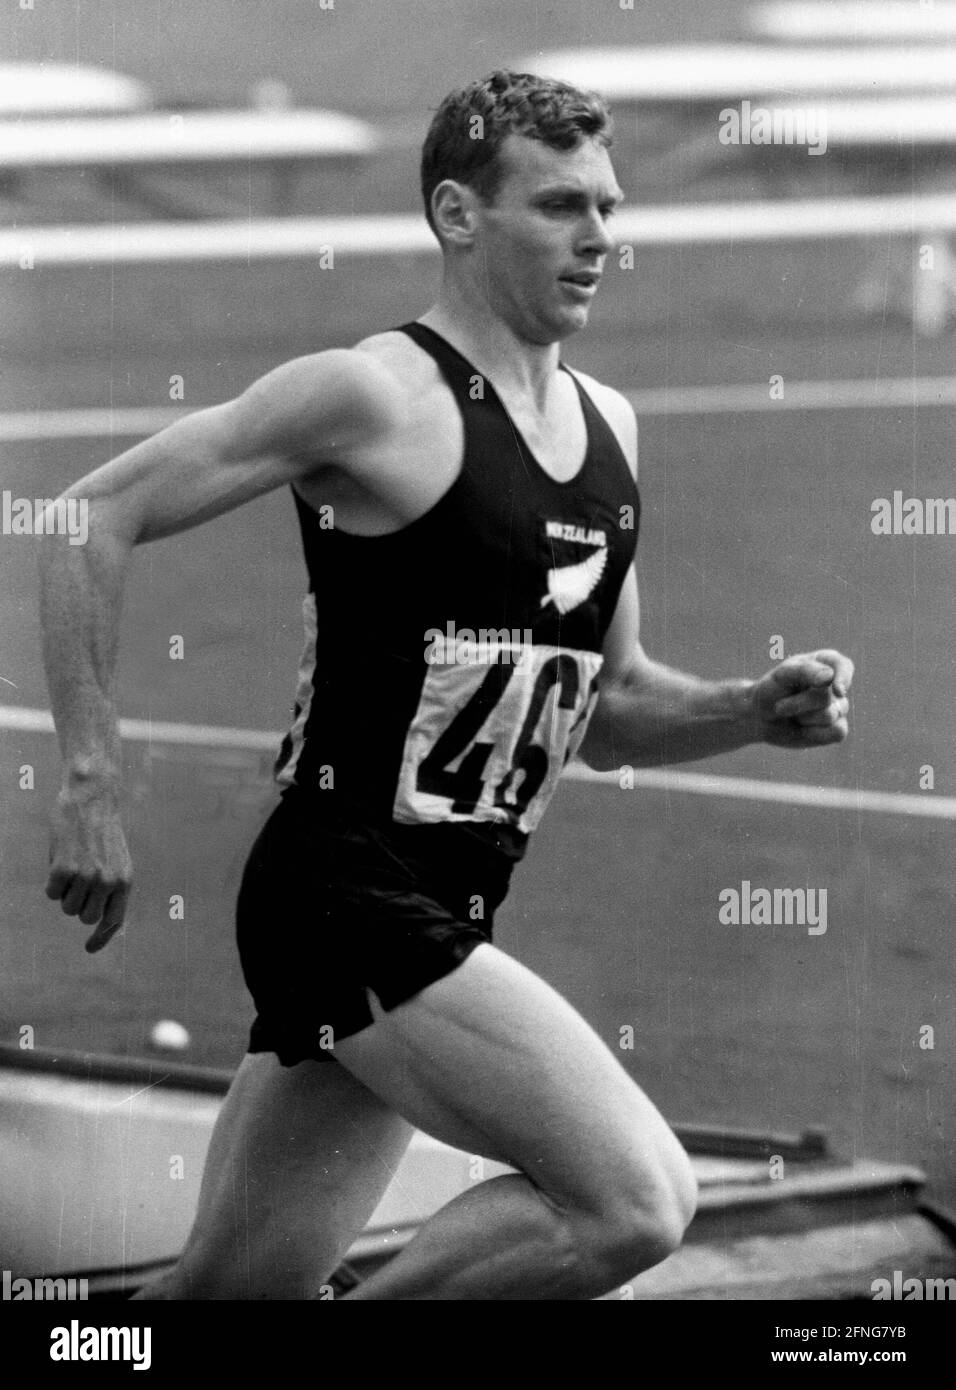 Peter Snell passes away. Three-time Tokyo and Rome 1500m and 800m gold medallist Peter Snell (New Zealand) has now passed away at the age of 81. Our picture shows Peter Snell in action at the 1964 Tokyo Olympics. Rec. 17.10.1964. [automated translation] Stock Photo